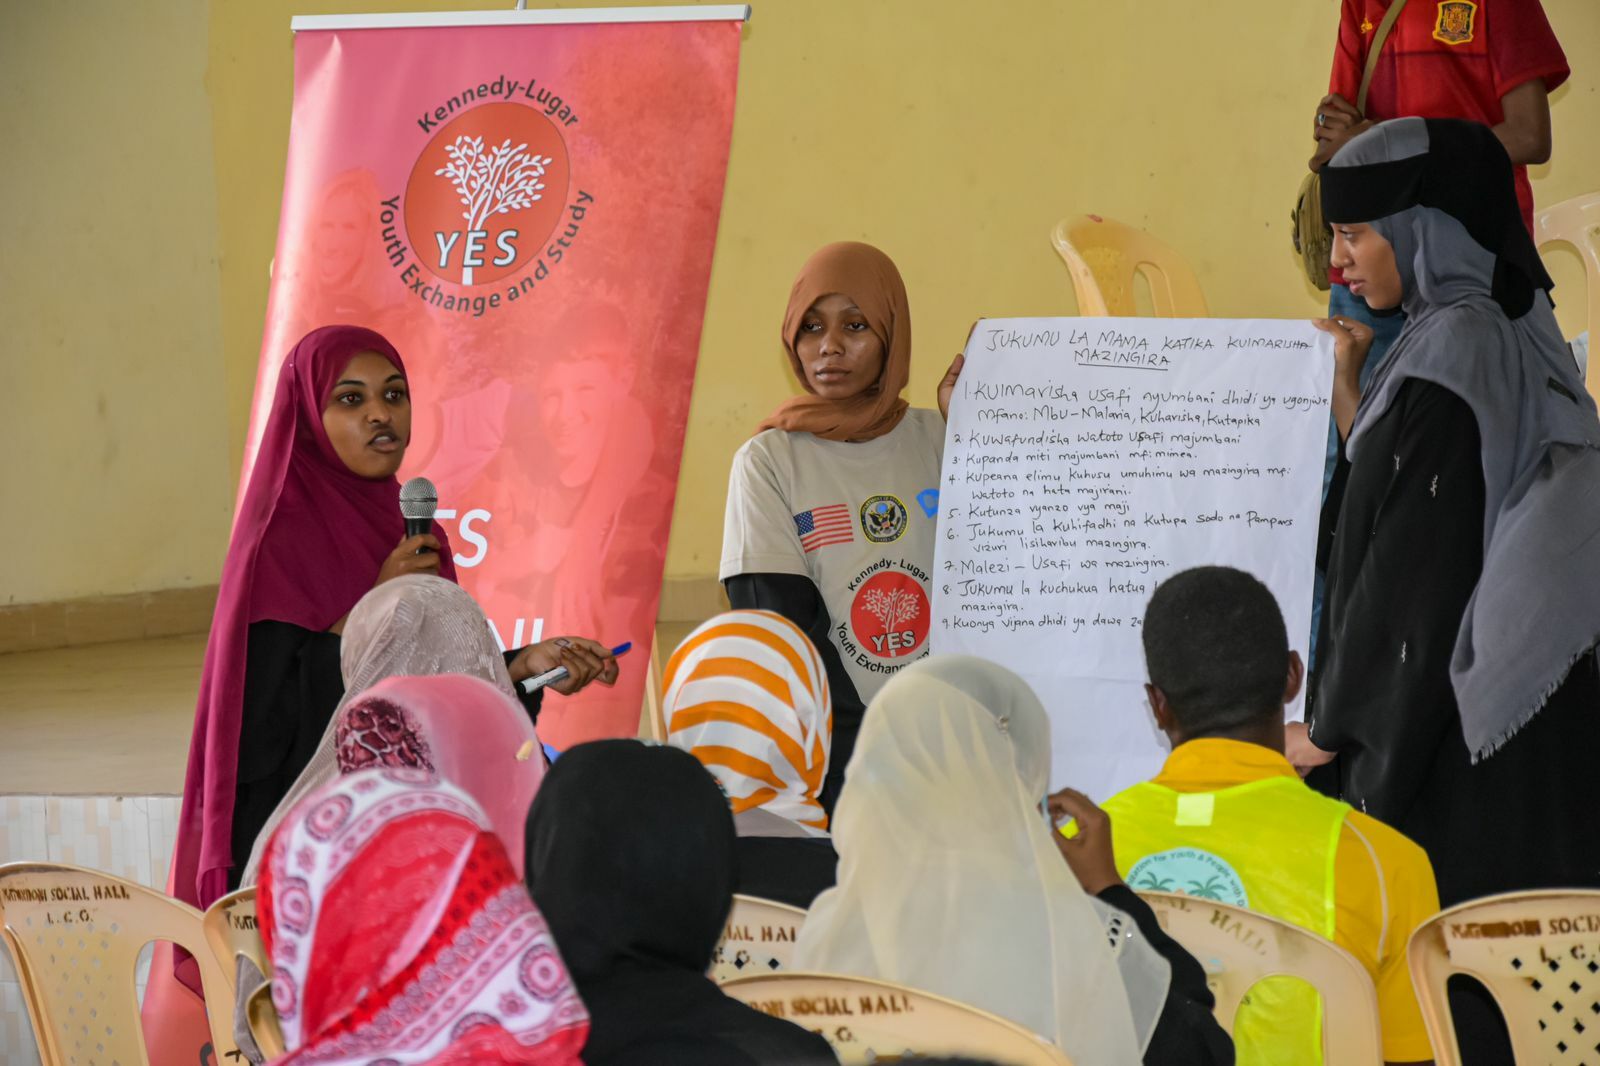 A group of participants giving a presentation holding a poster